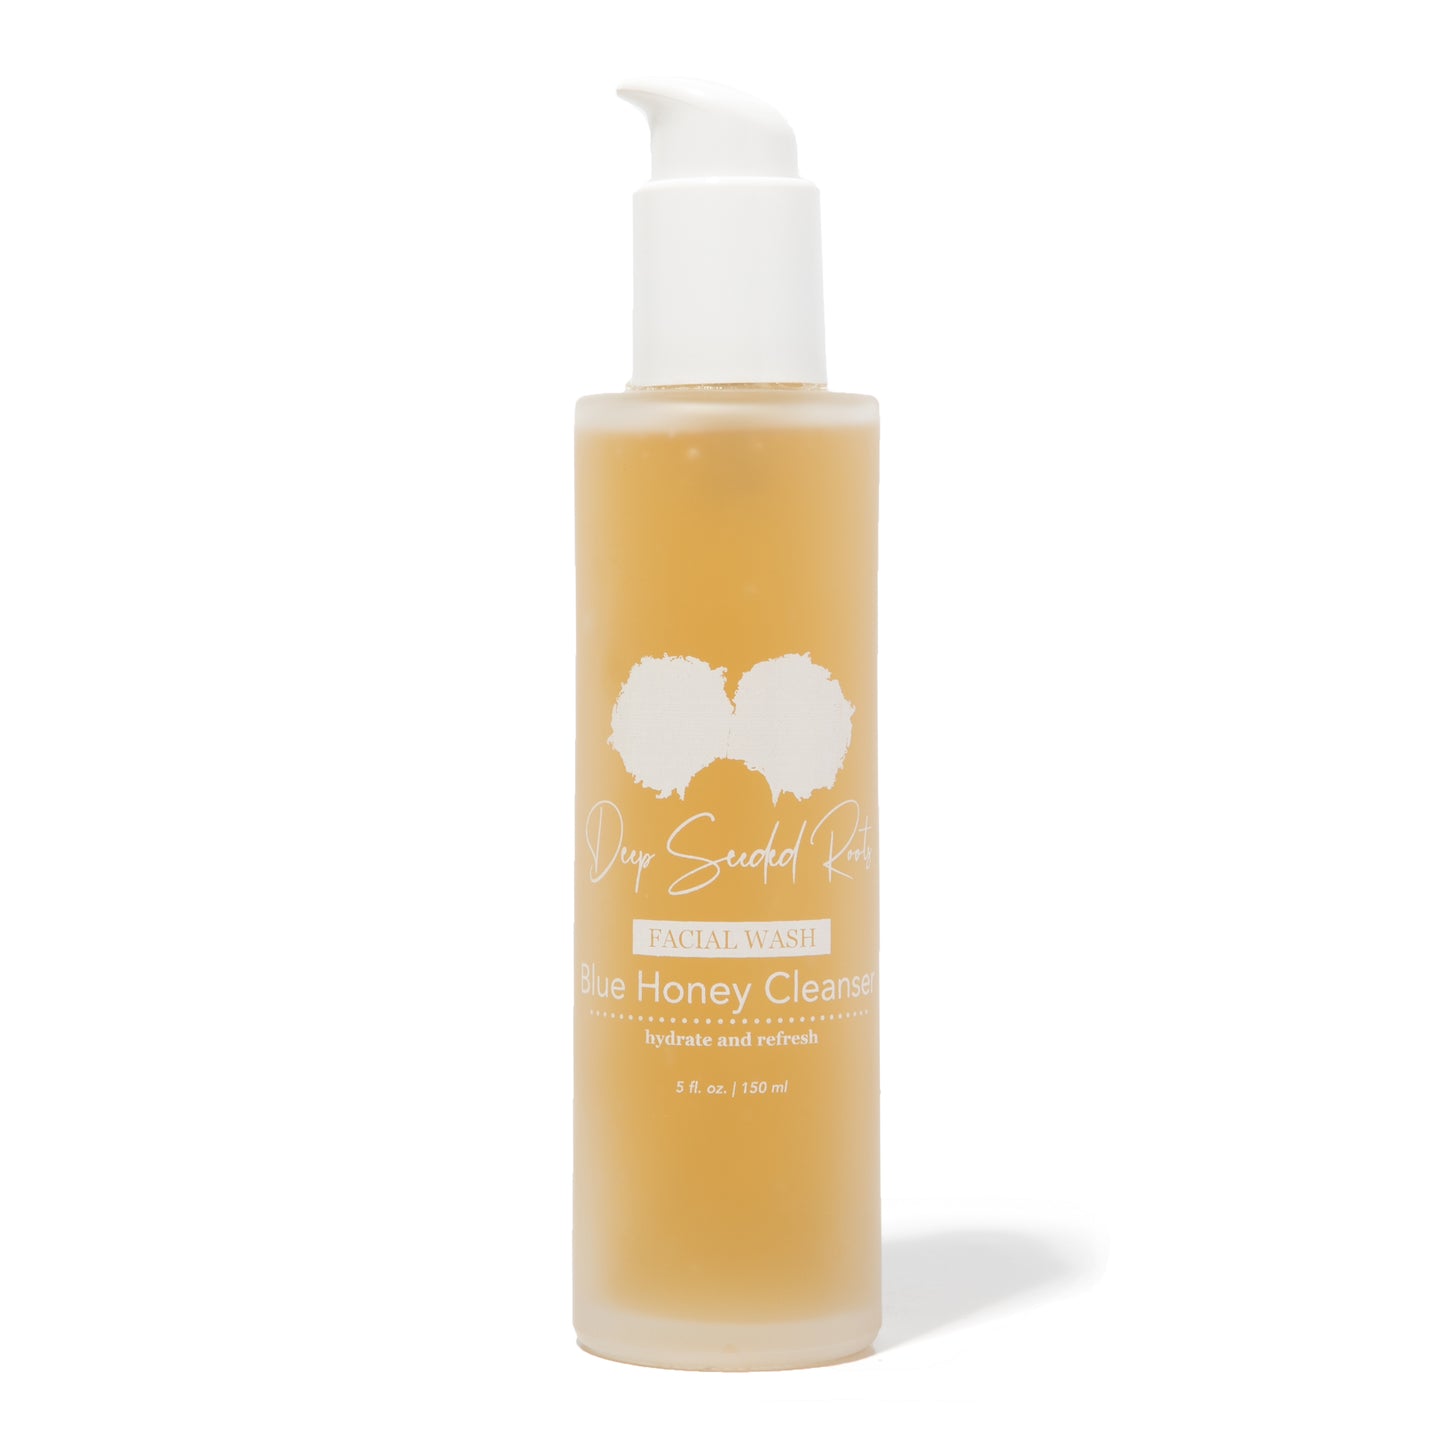 Deep Seeded Roots Blue Honey Cleanser on white background 